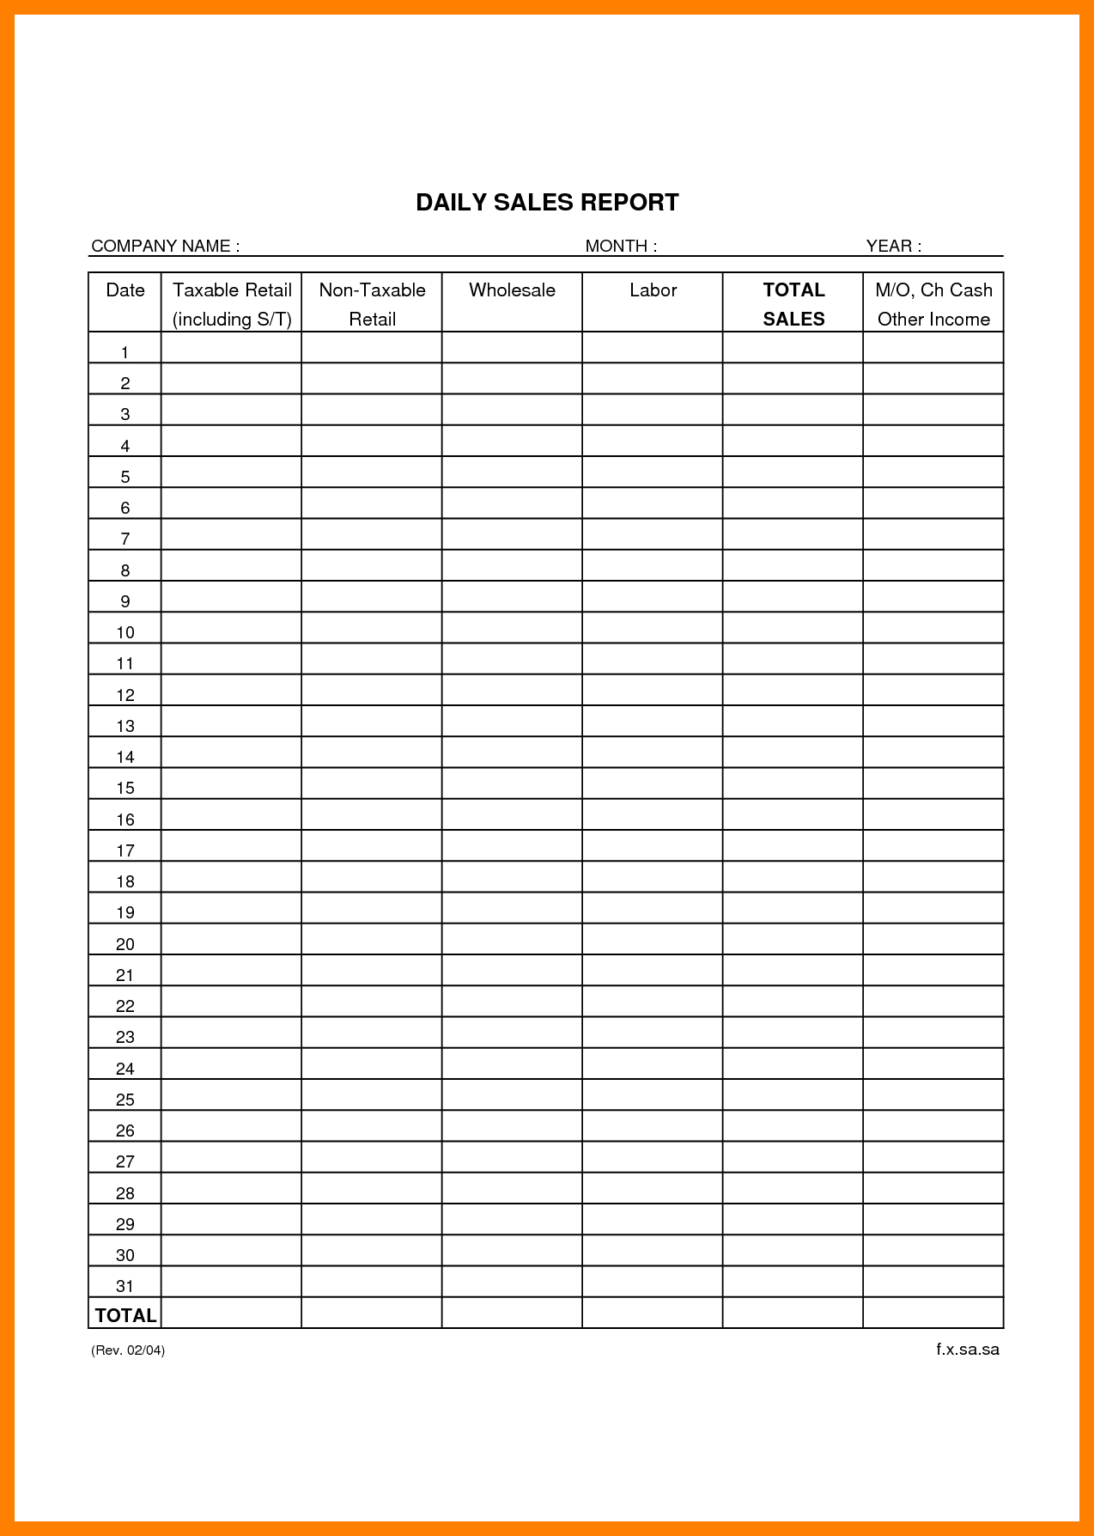 Daily Sales Report Template Excel Free Sample Professional Template